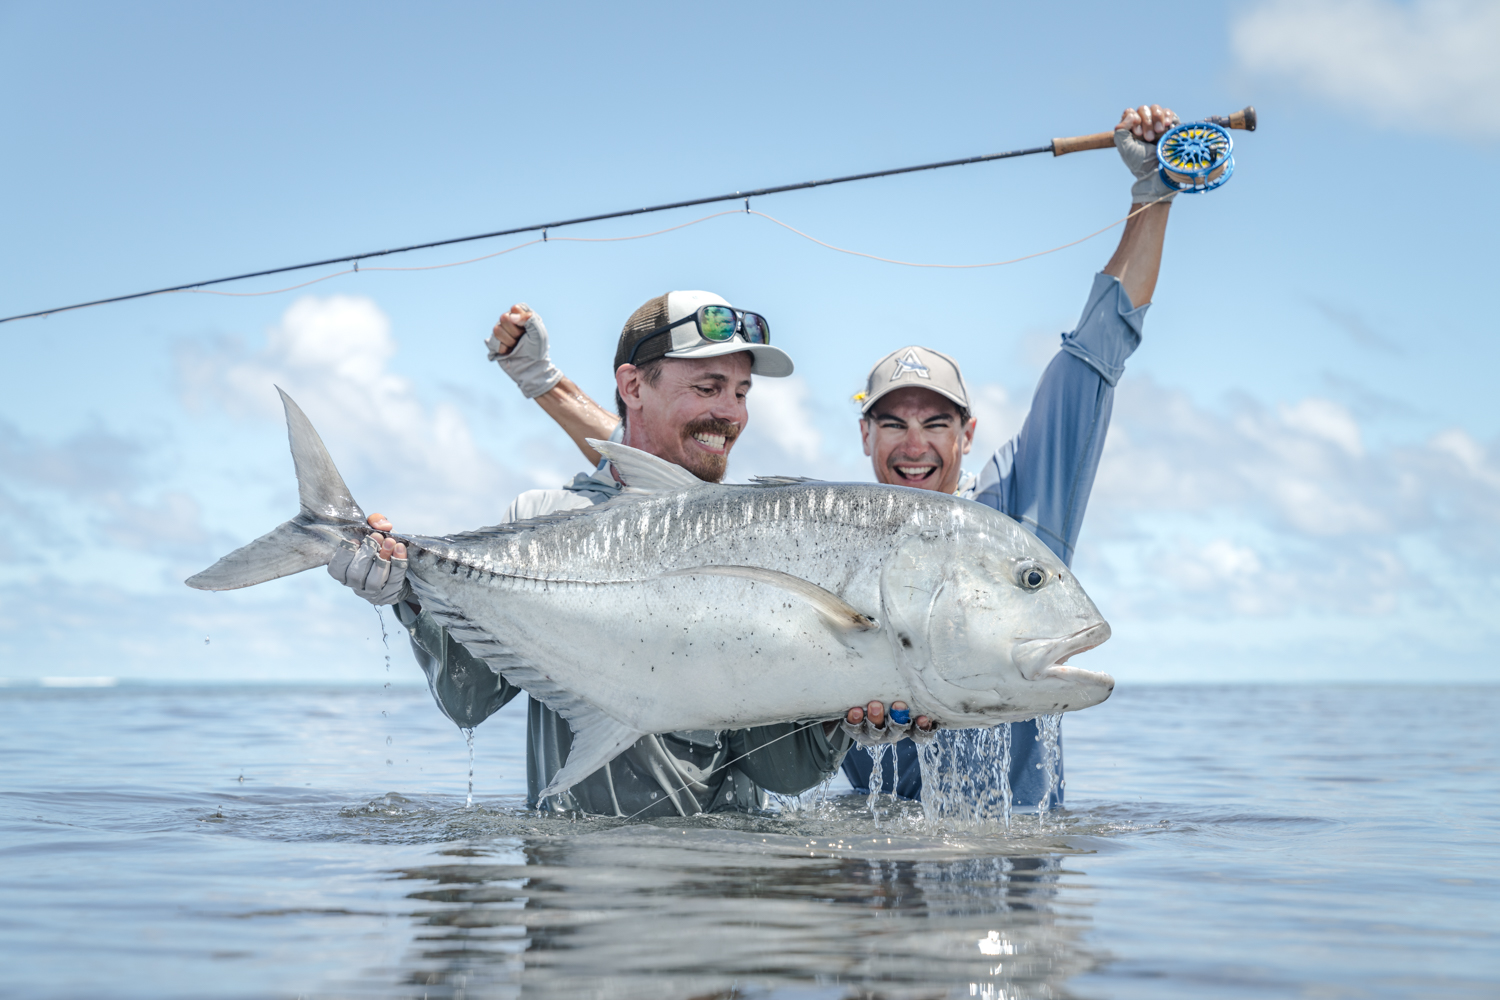 Fly Fishing Giant Trevally - The Catch, Facts, Flies, Rods & More